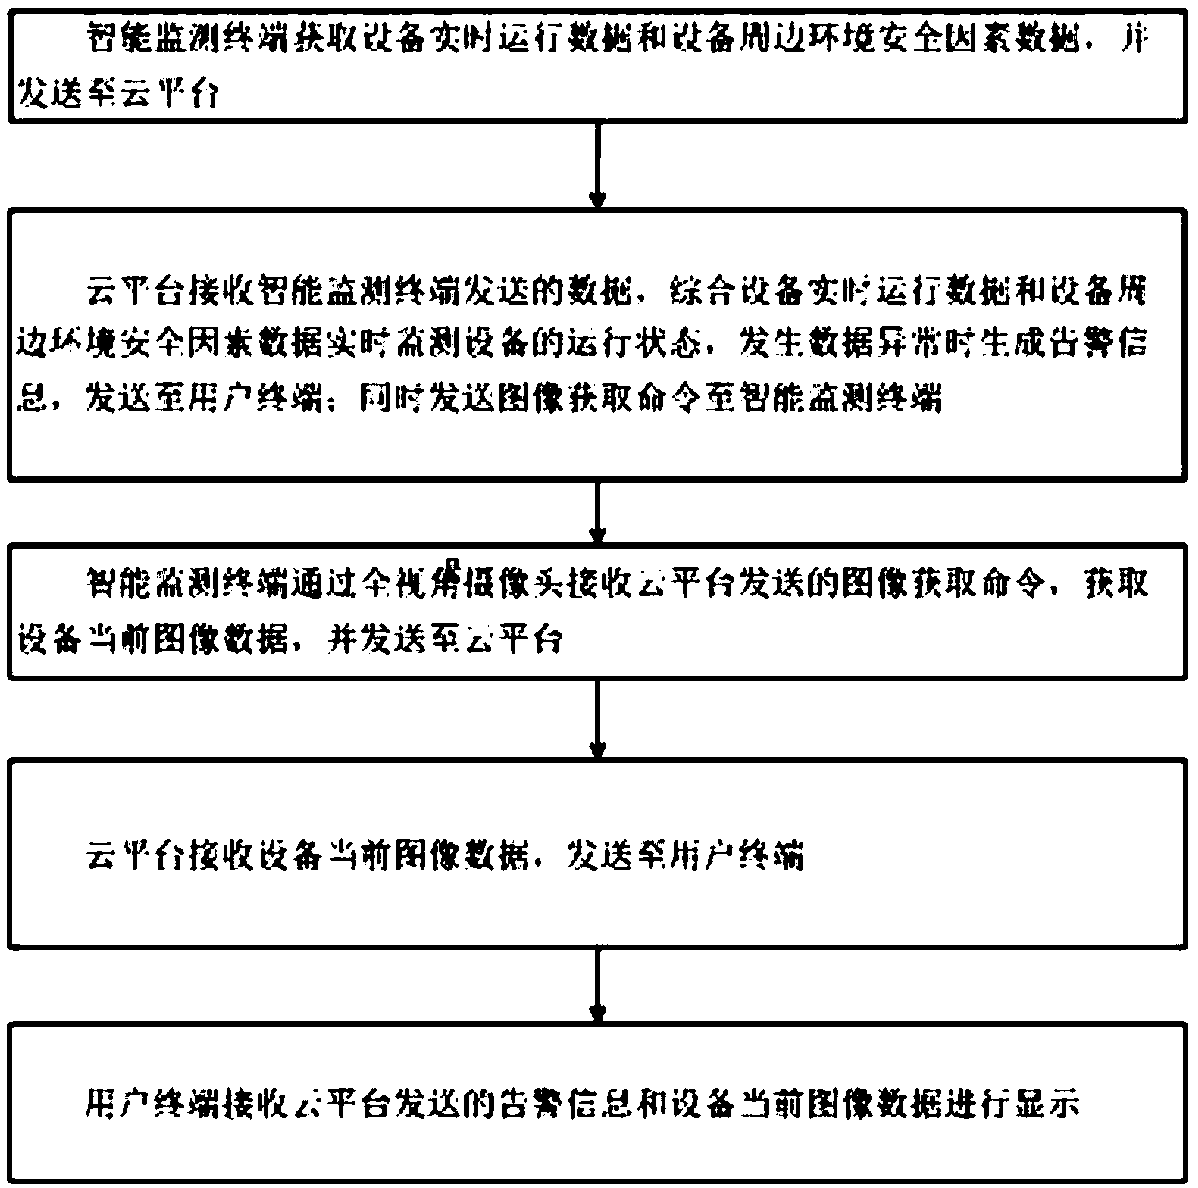 Hospital equipment safety stereoscopic monitoring cloud platform, system and method